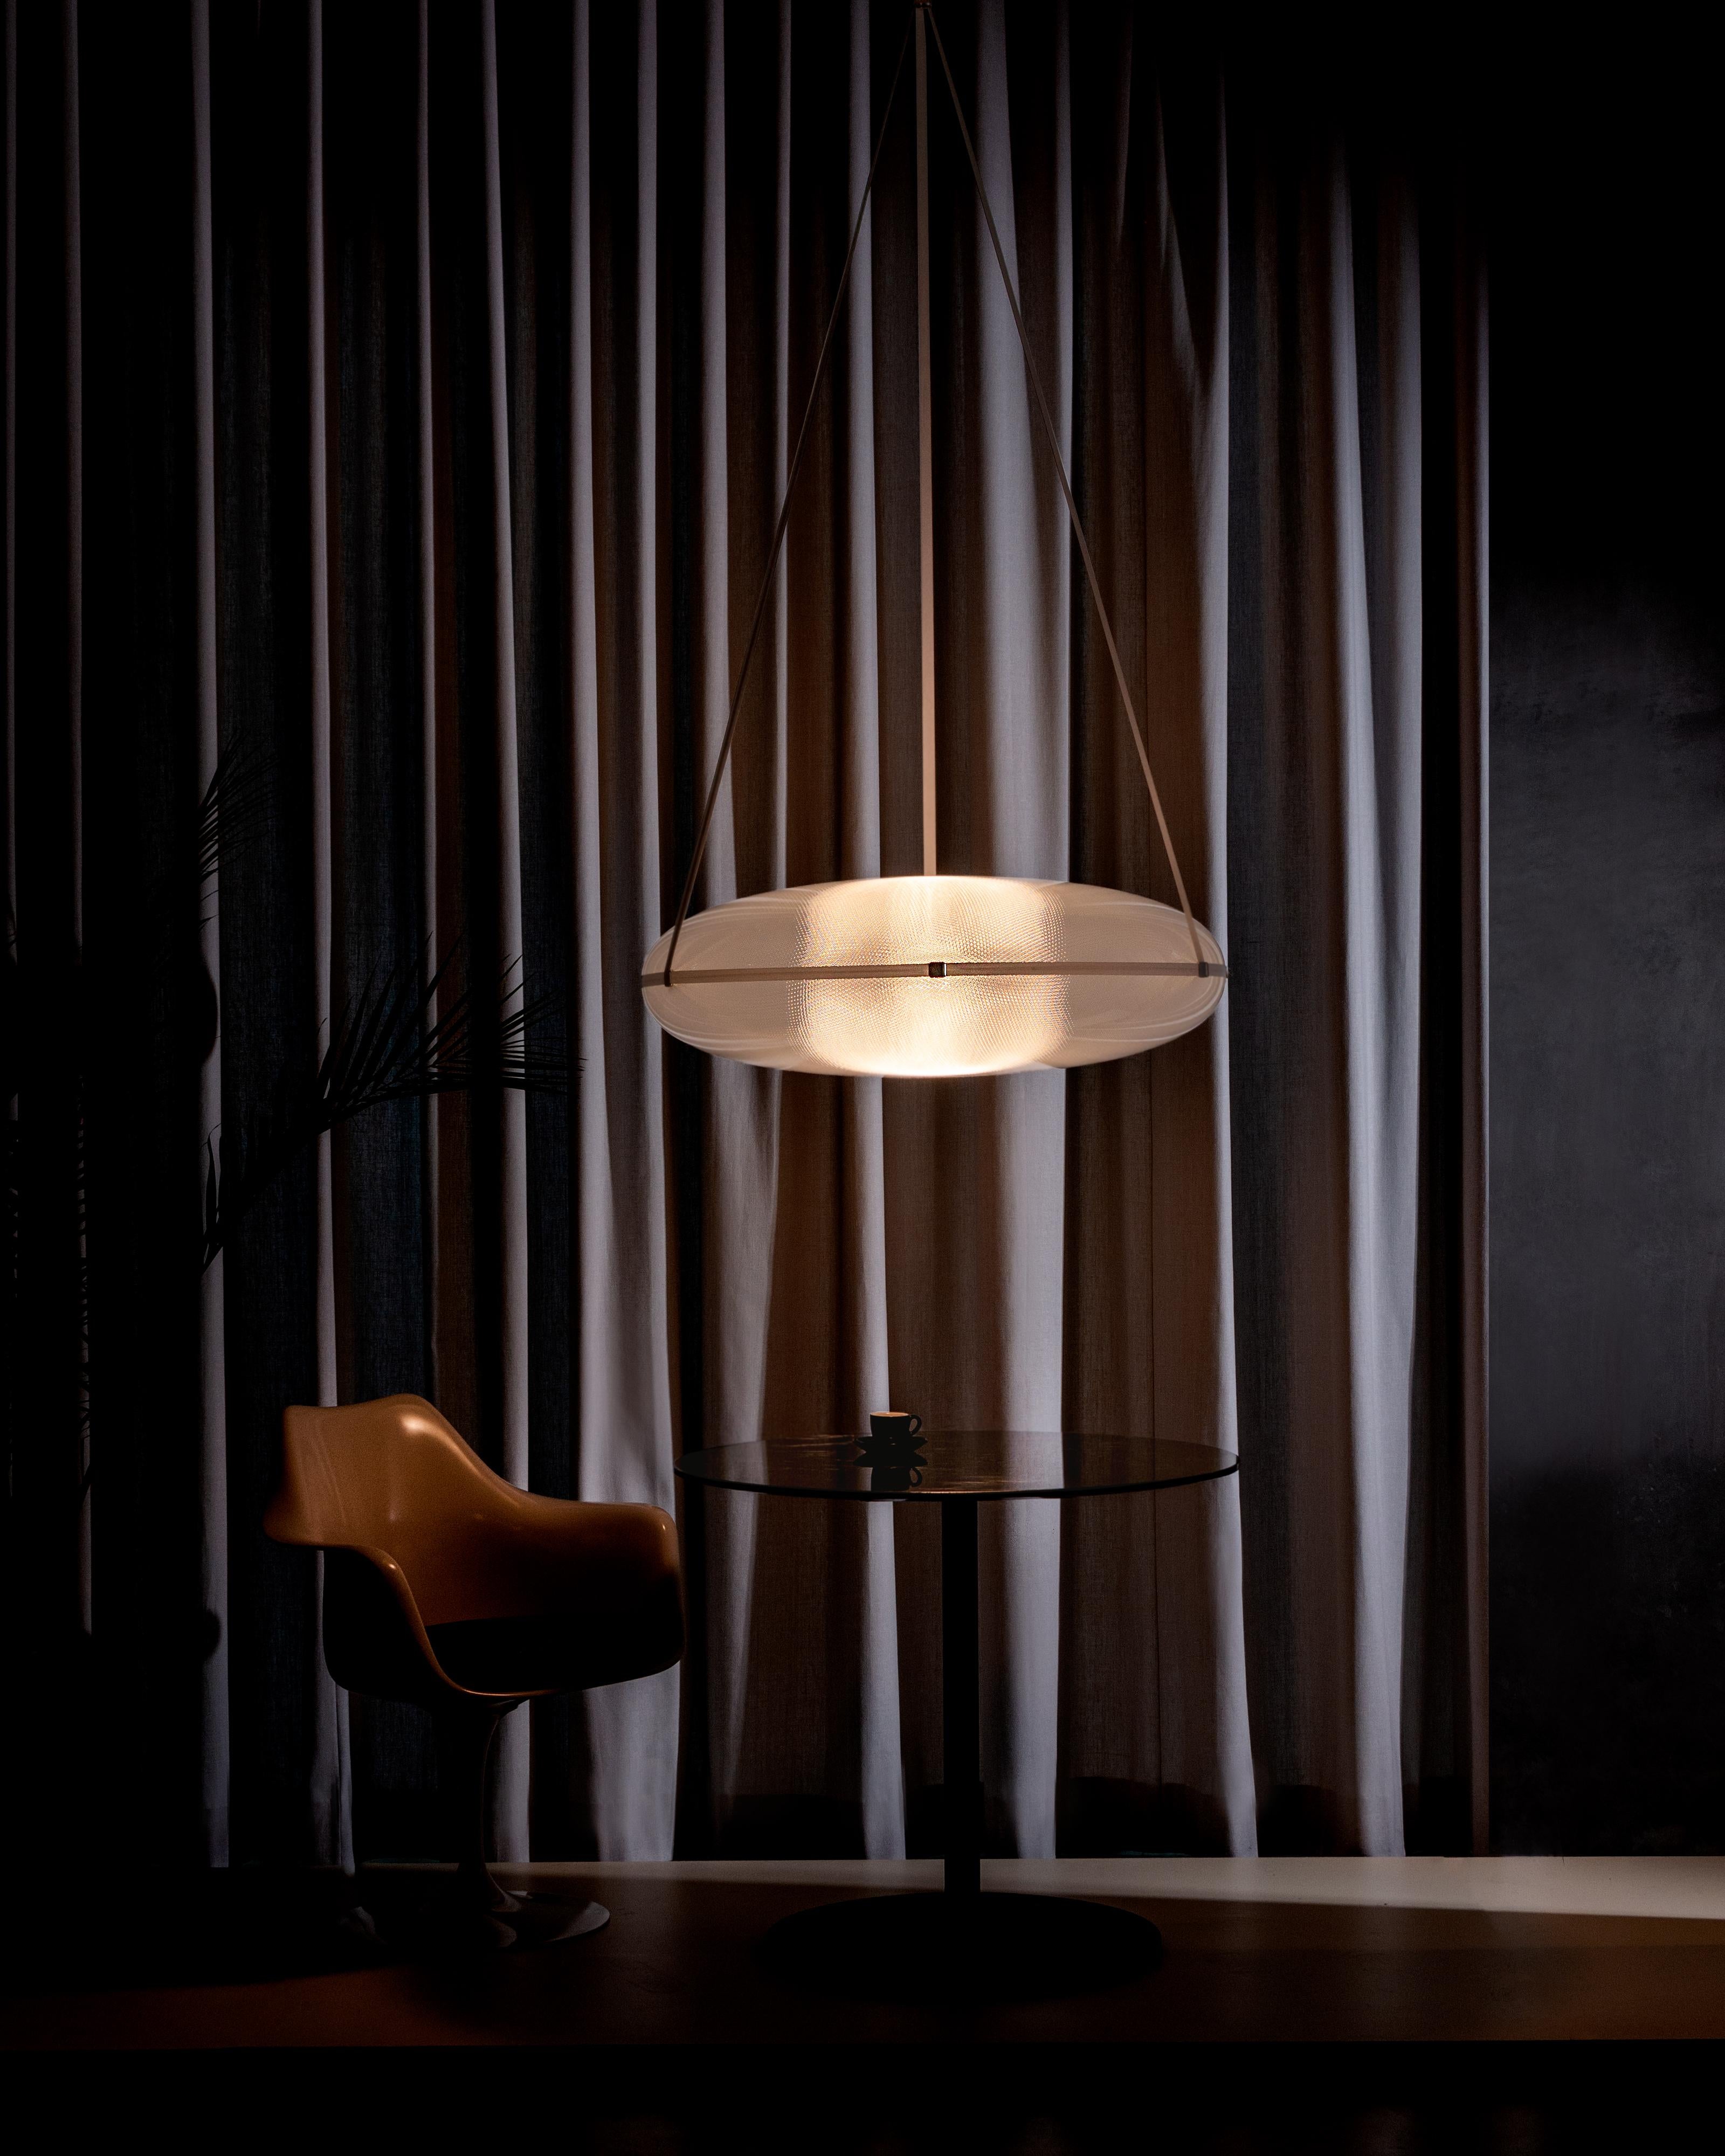 Contemporary pendant lamp 'Iris'

Electrical : 
Voltage: 120 V – 277 V 
Lamp: Integral 34 W 35 V DC LED

The model shown in picture:
- Diameter: 90 cm Height. 30 cm 
- Finish: Black
- Wire height: 300 cm
- Modules : B and B
______
IRIS
A